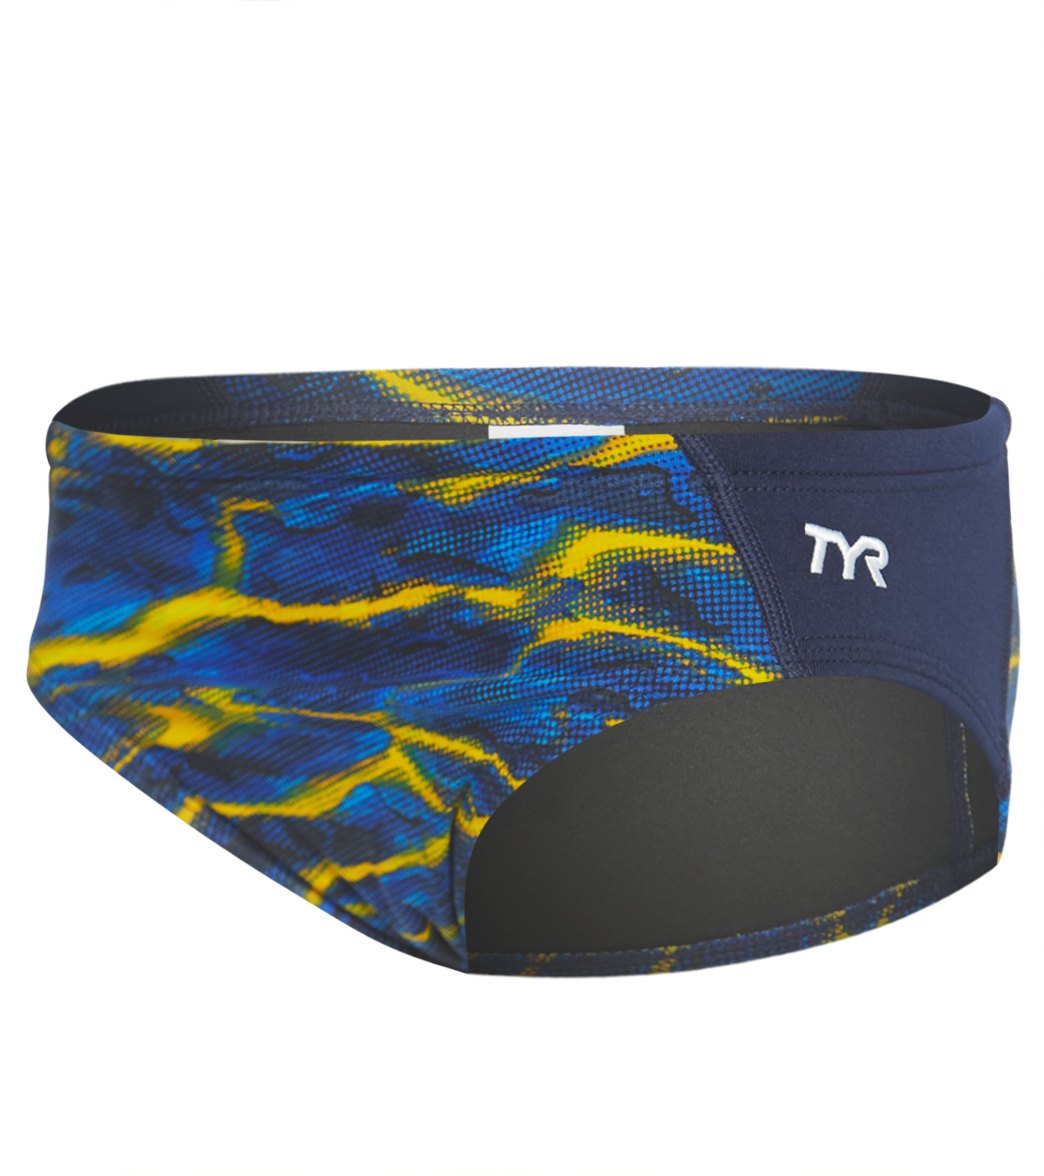 TYR Boys' Lambent Blade Racer Brief Swimsuit - Navy/Gold 22 Polyester/Spandex - Swimoutlet.com